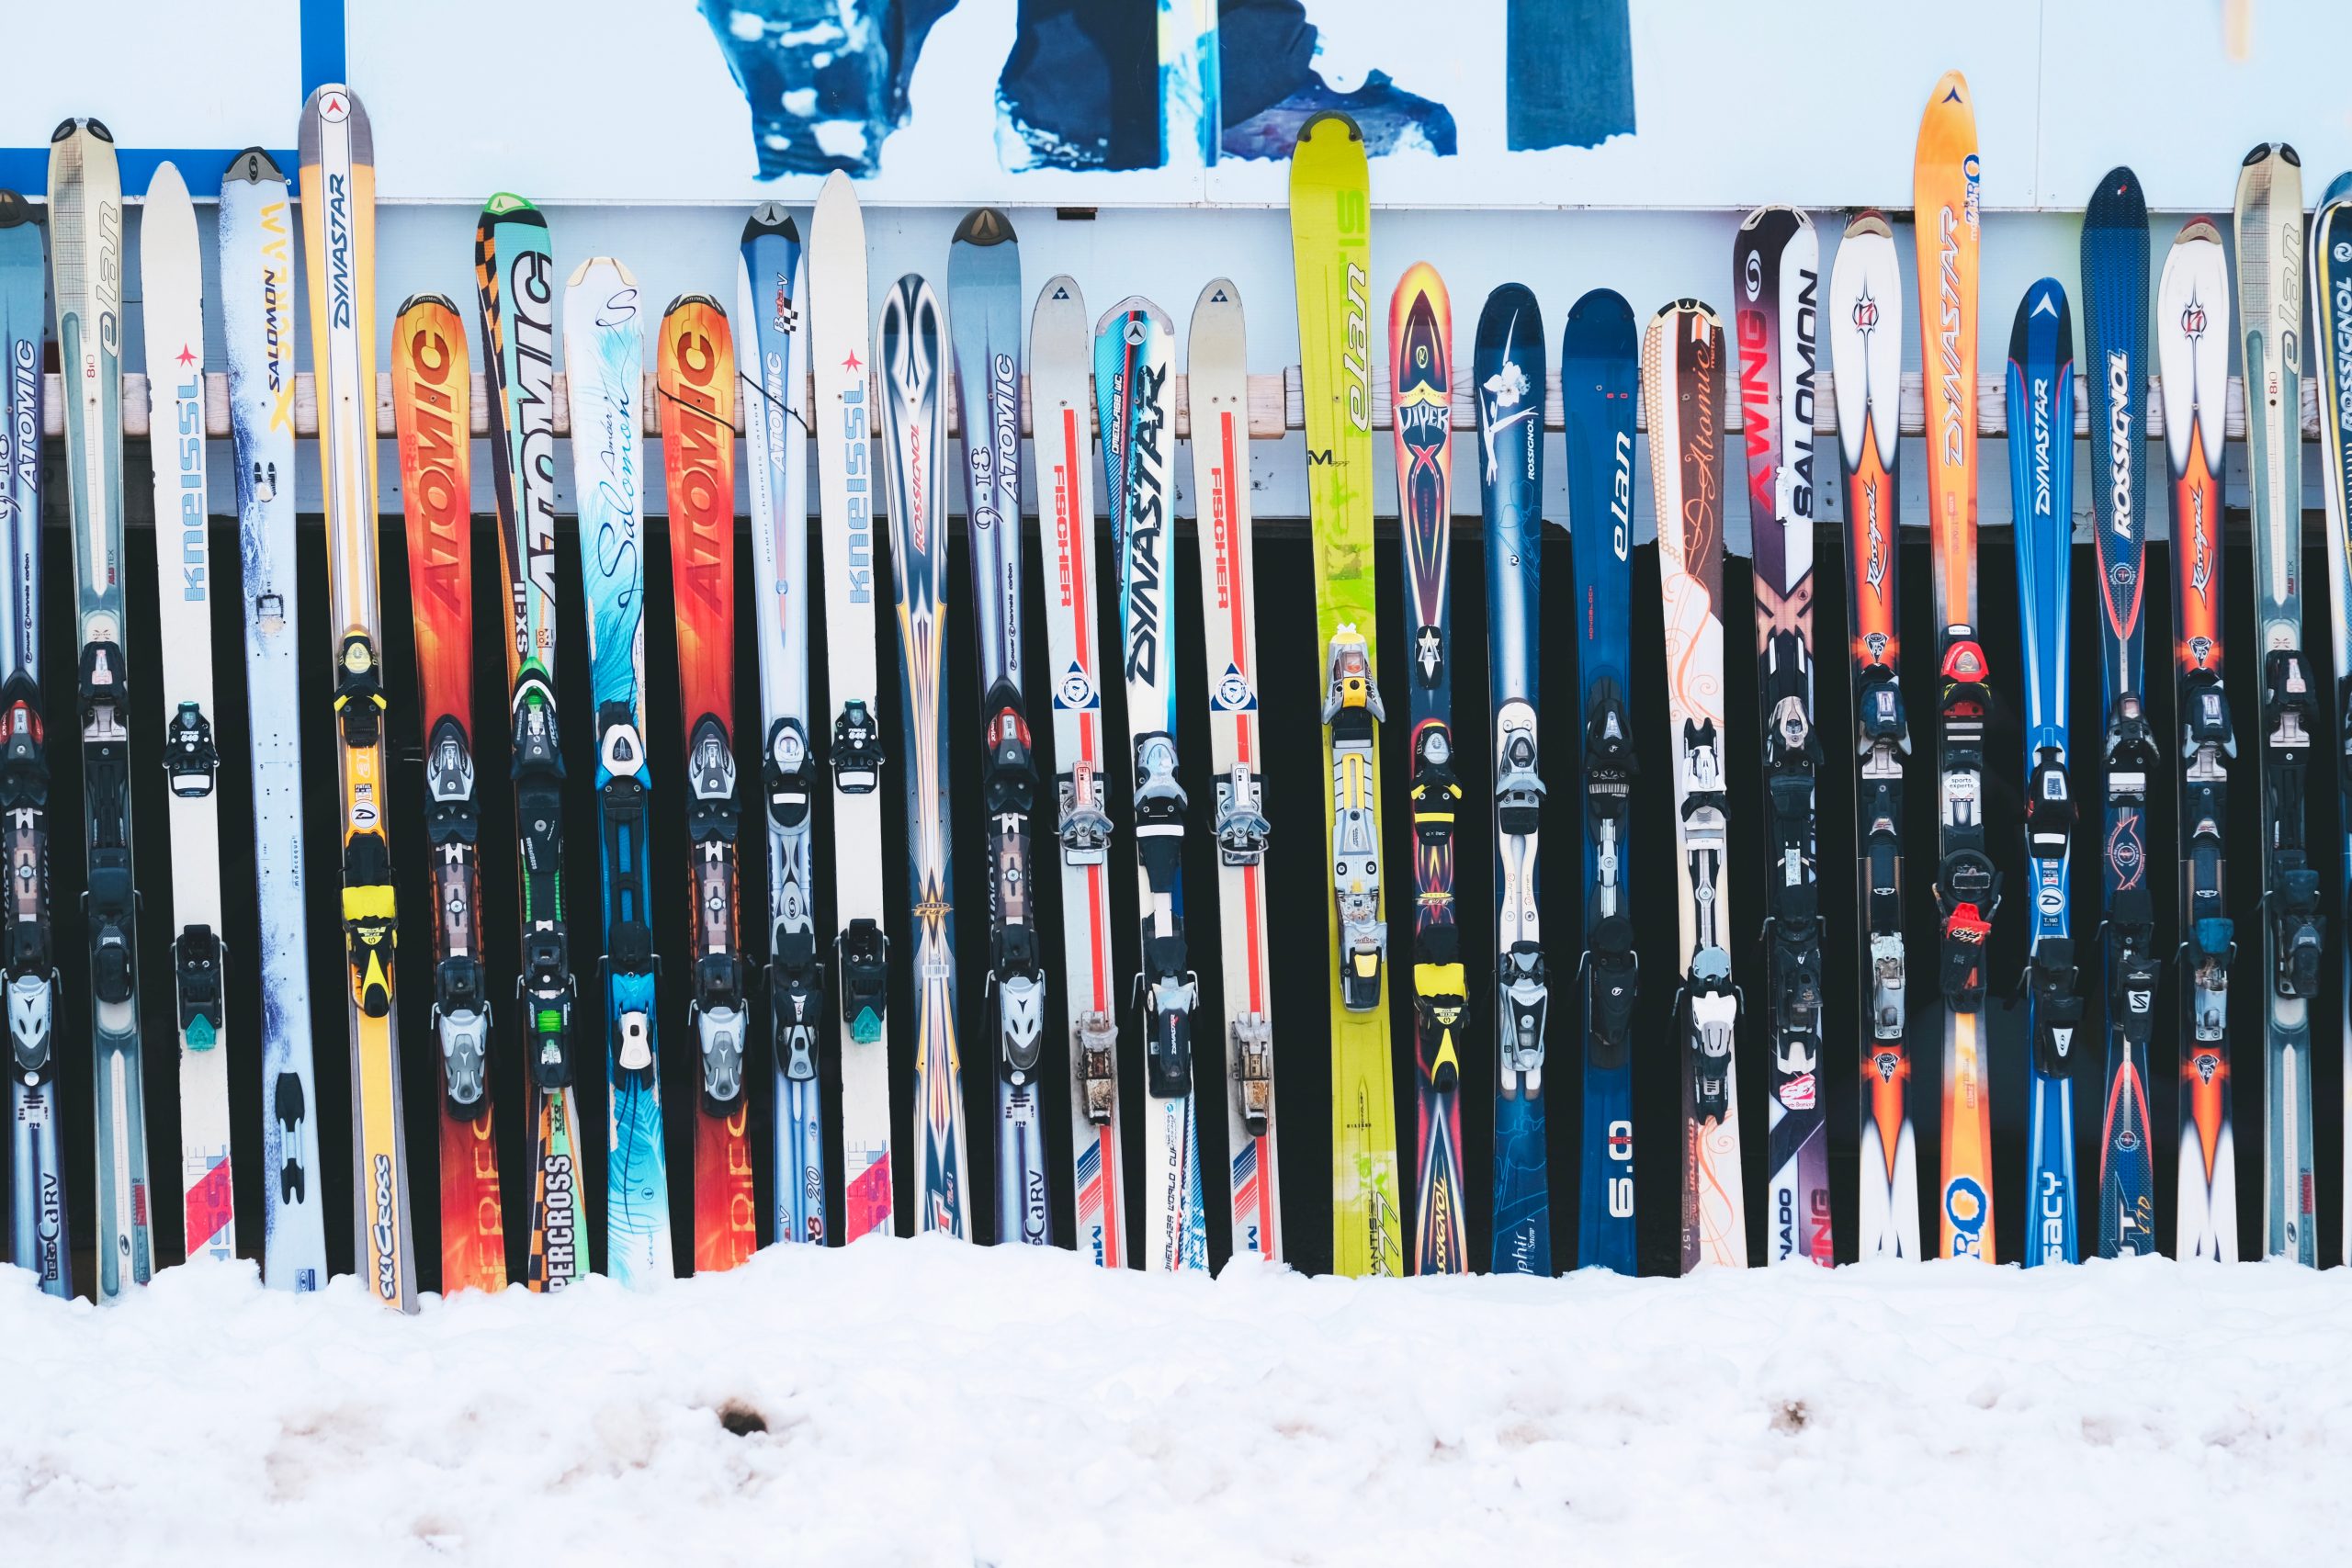 snowboards resting in the snow